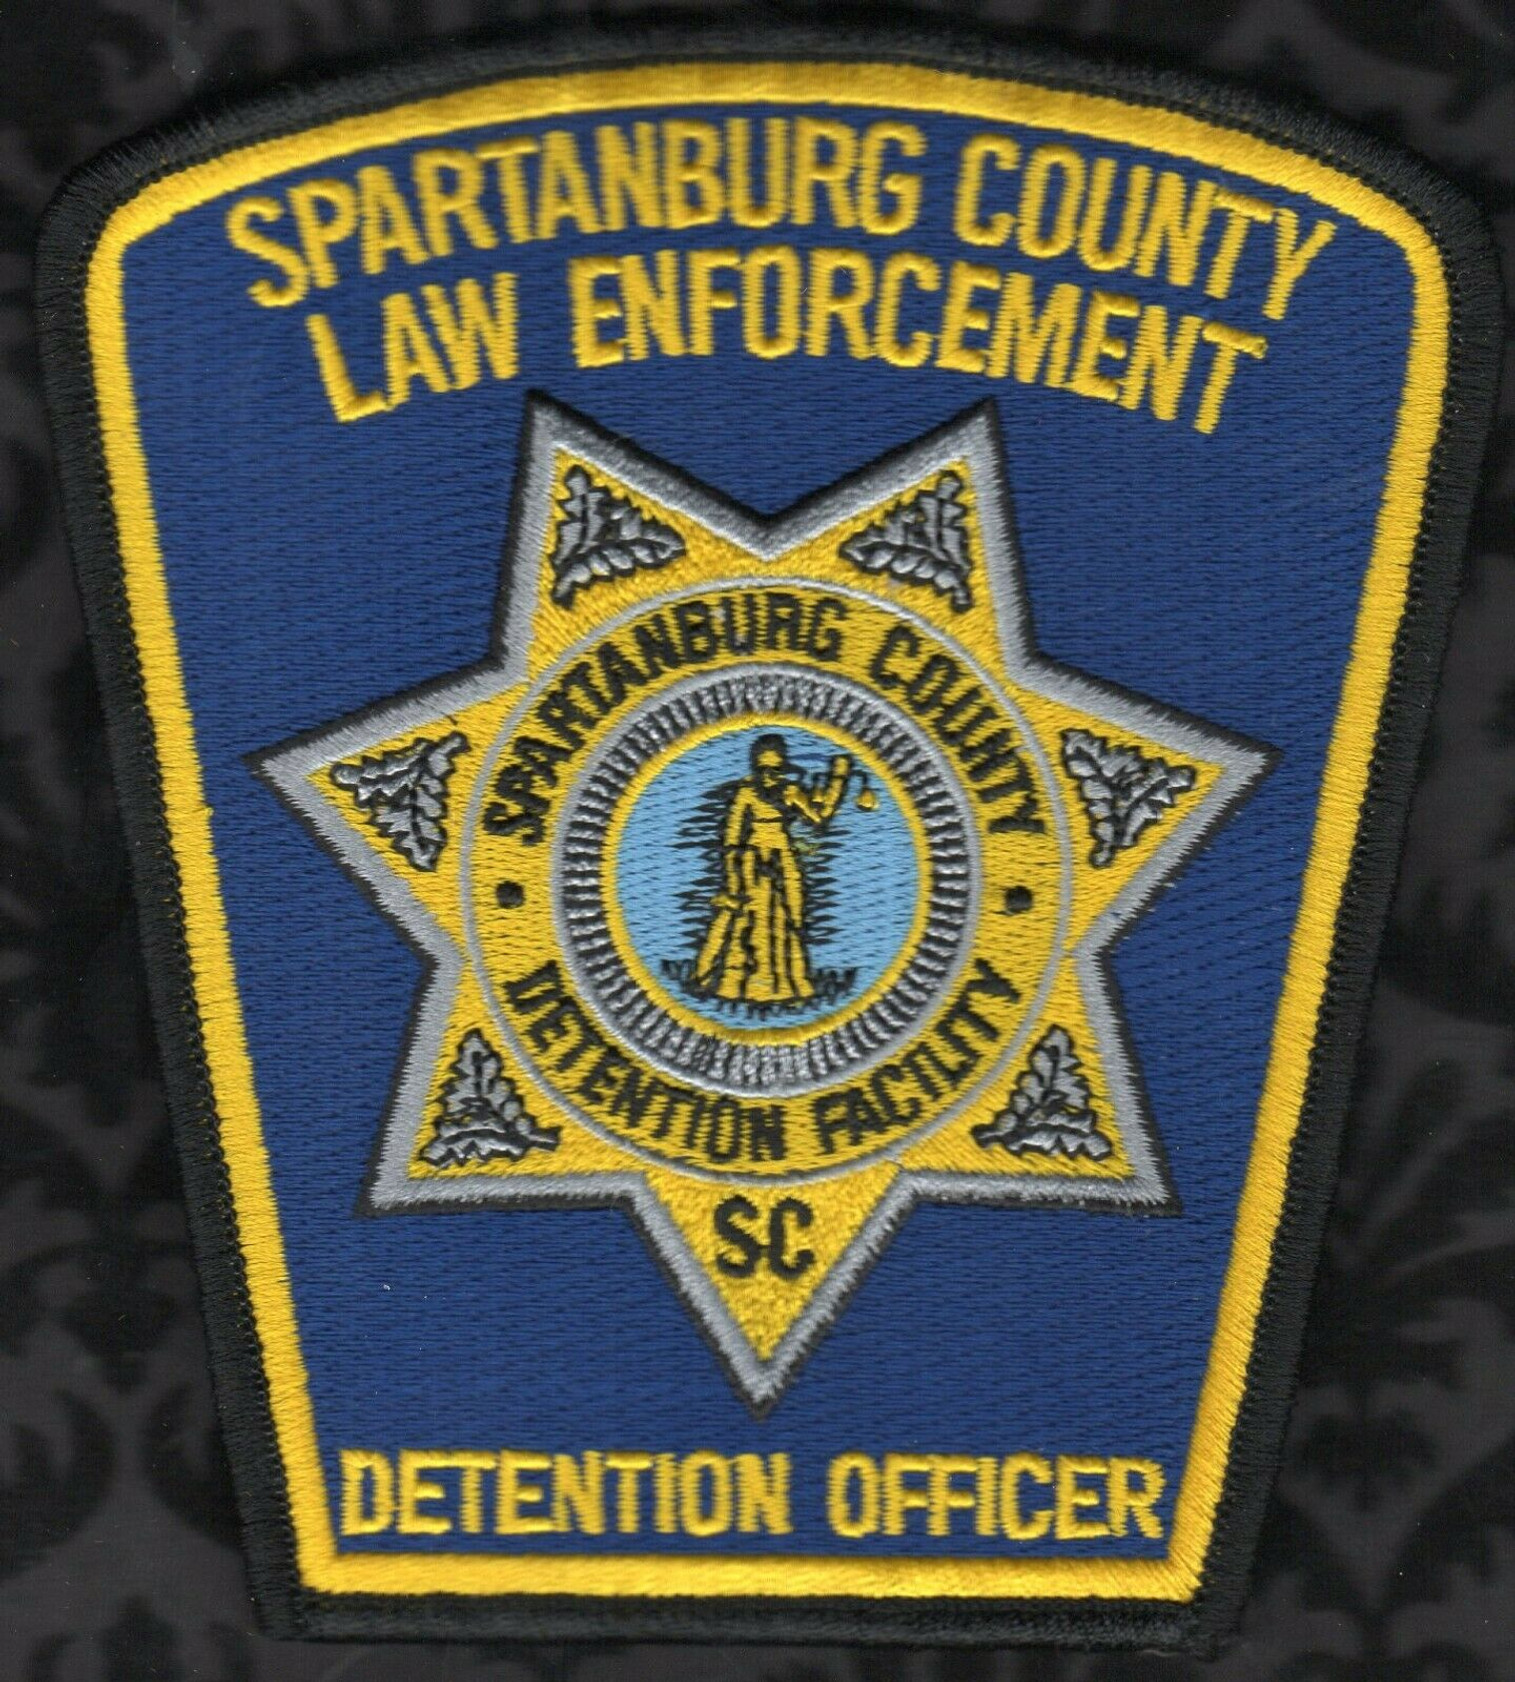 Spartanburg County Law Enforcement Detention Officer SC Police Patch